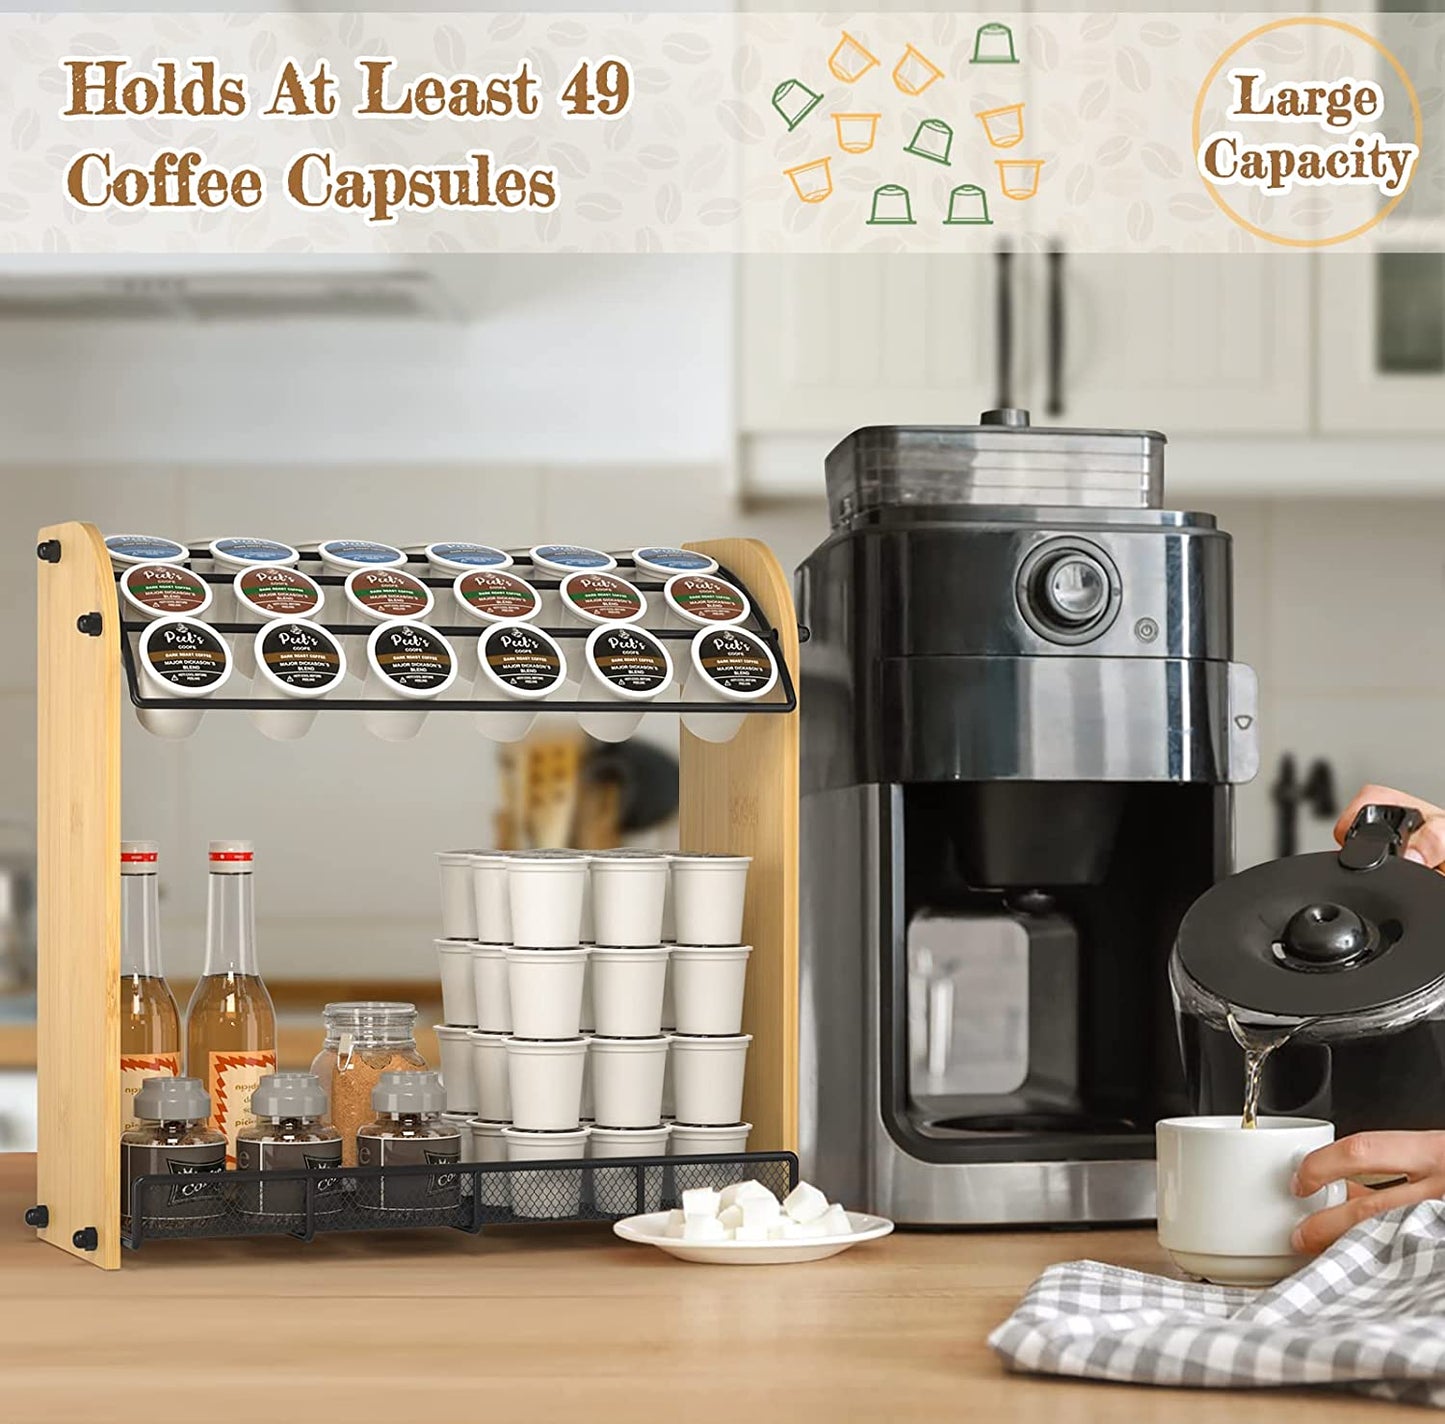 K Cup Holder Large Capacity Coffee Pod Holder Coffee Bar Accessories and Cup Storage Organizer Save Space for Home Office Kitchen Counter Organizer(at Least 49 Coffee Pods)